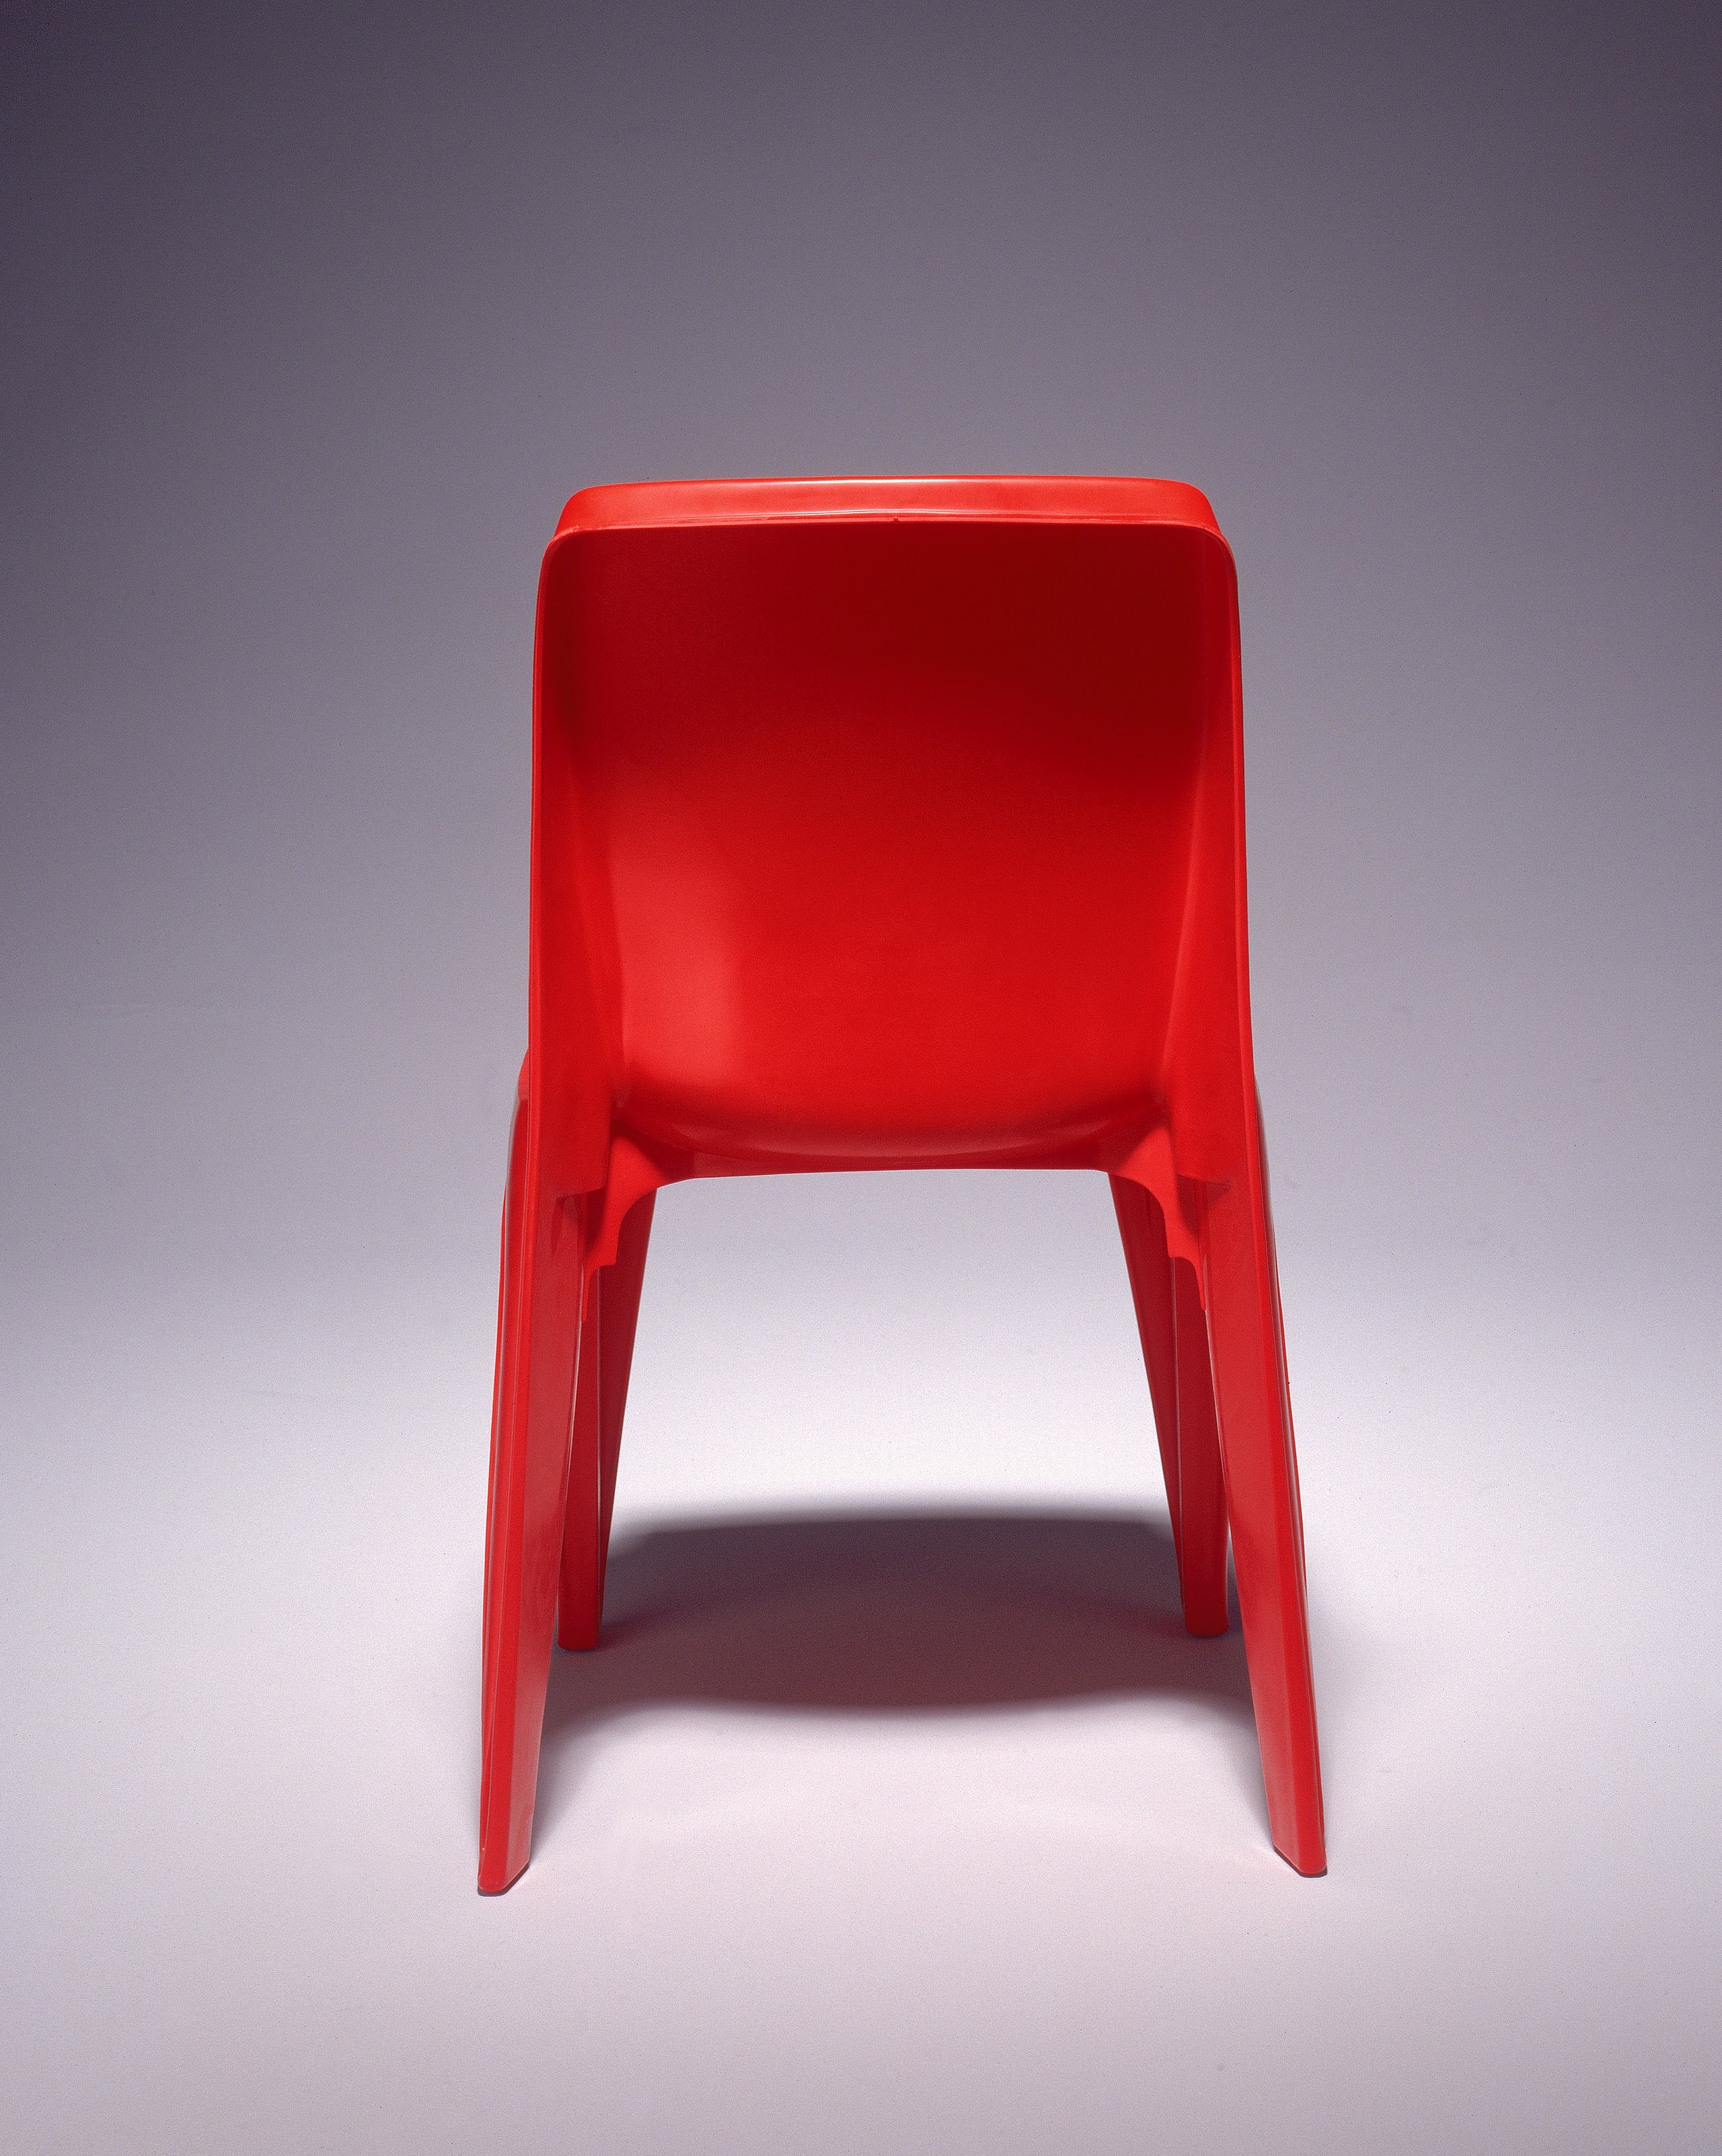 'Integra' chairs by Sebel